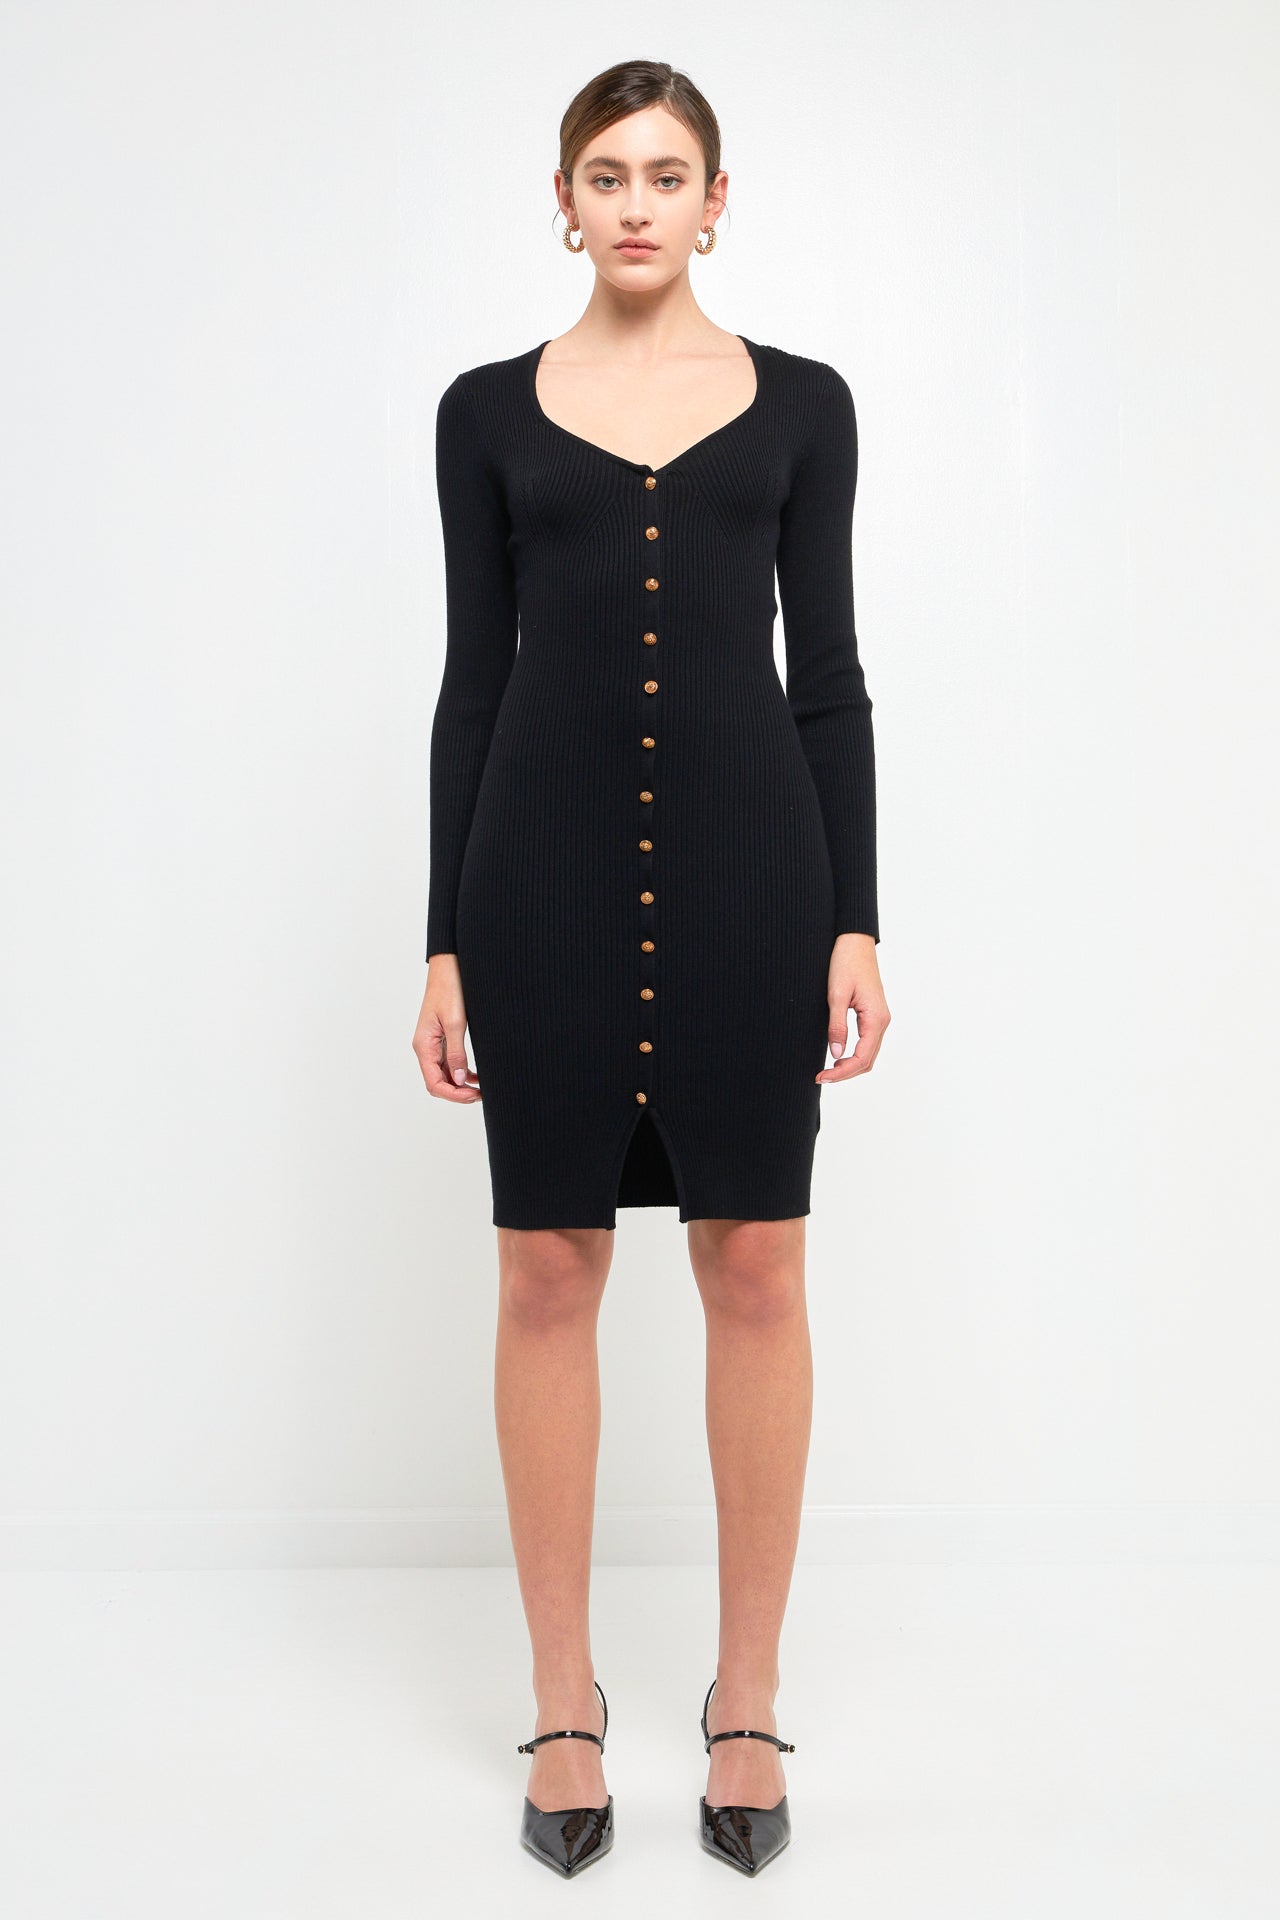 ENDLESS ROSE - Long Sleeve Button Down Knit Dress - DRESSES available at Objectrare